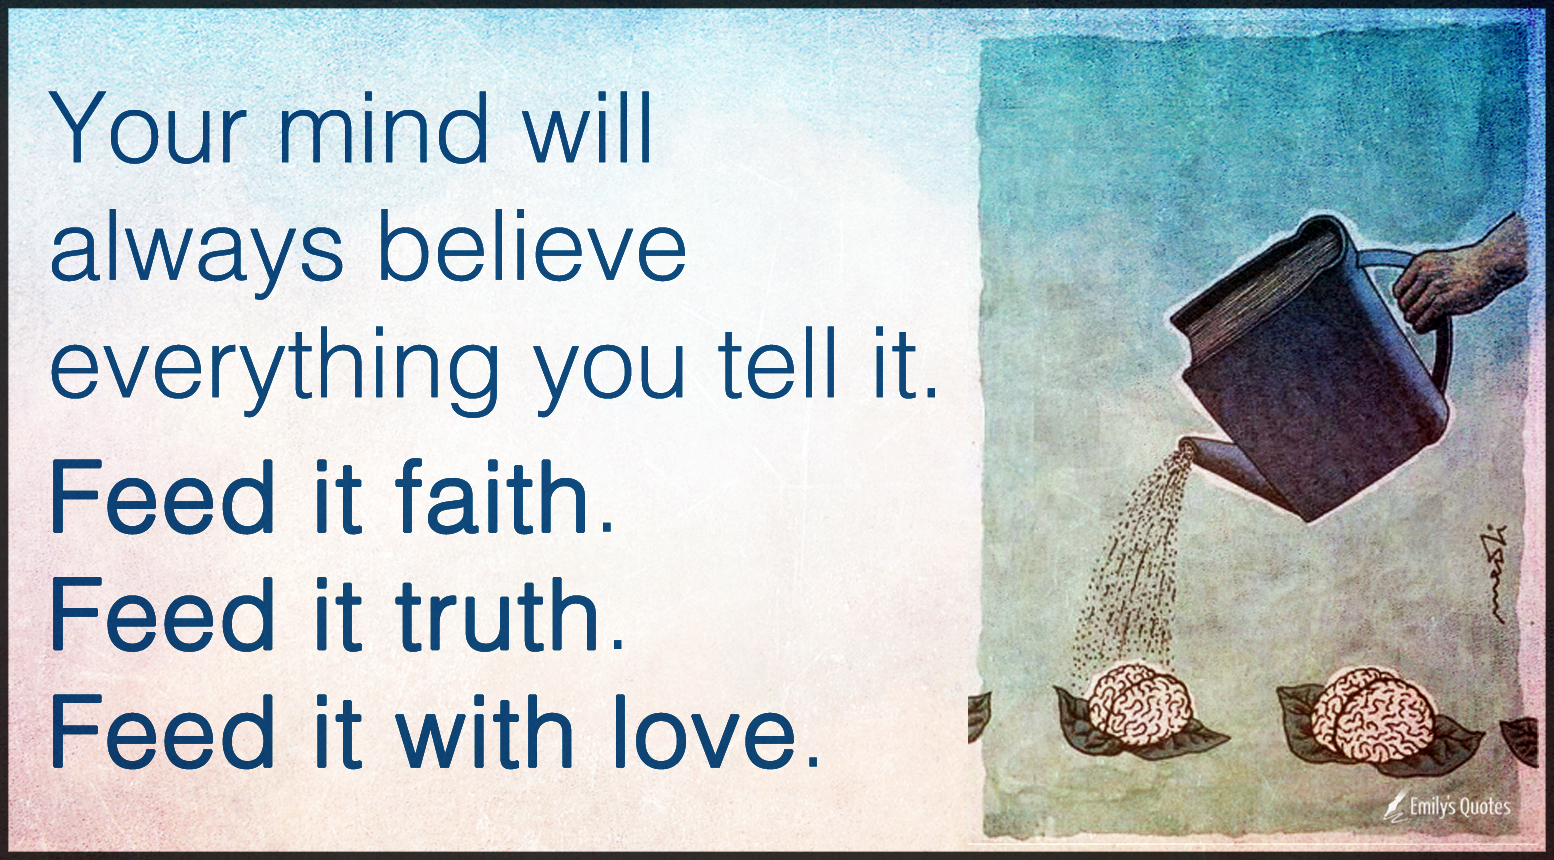 Your mind will always believe everything you tell it. Feed it faith